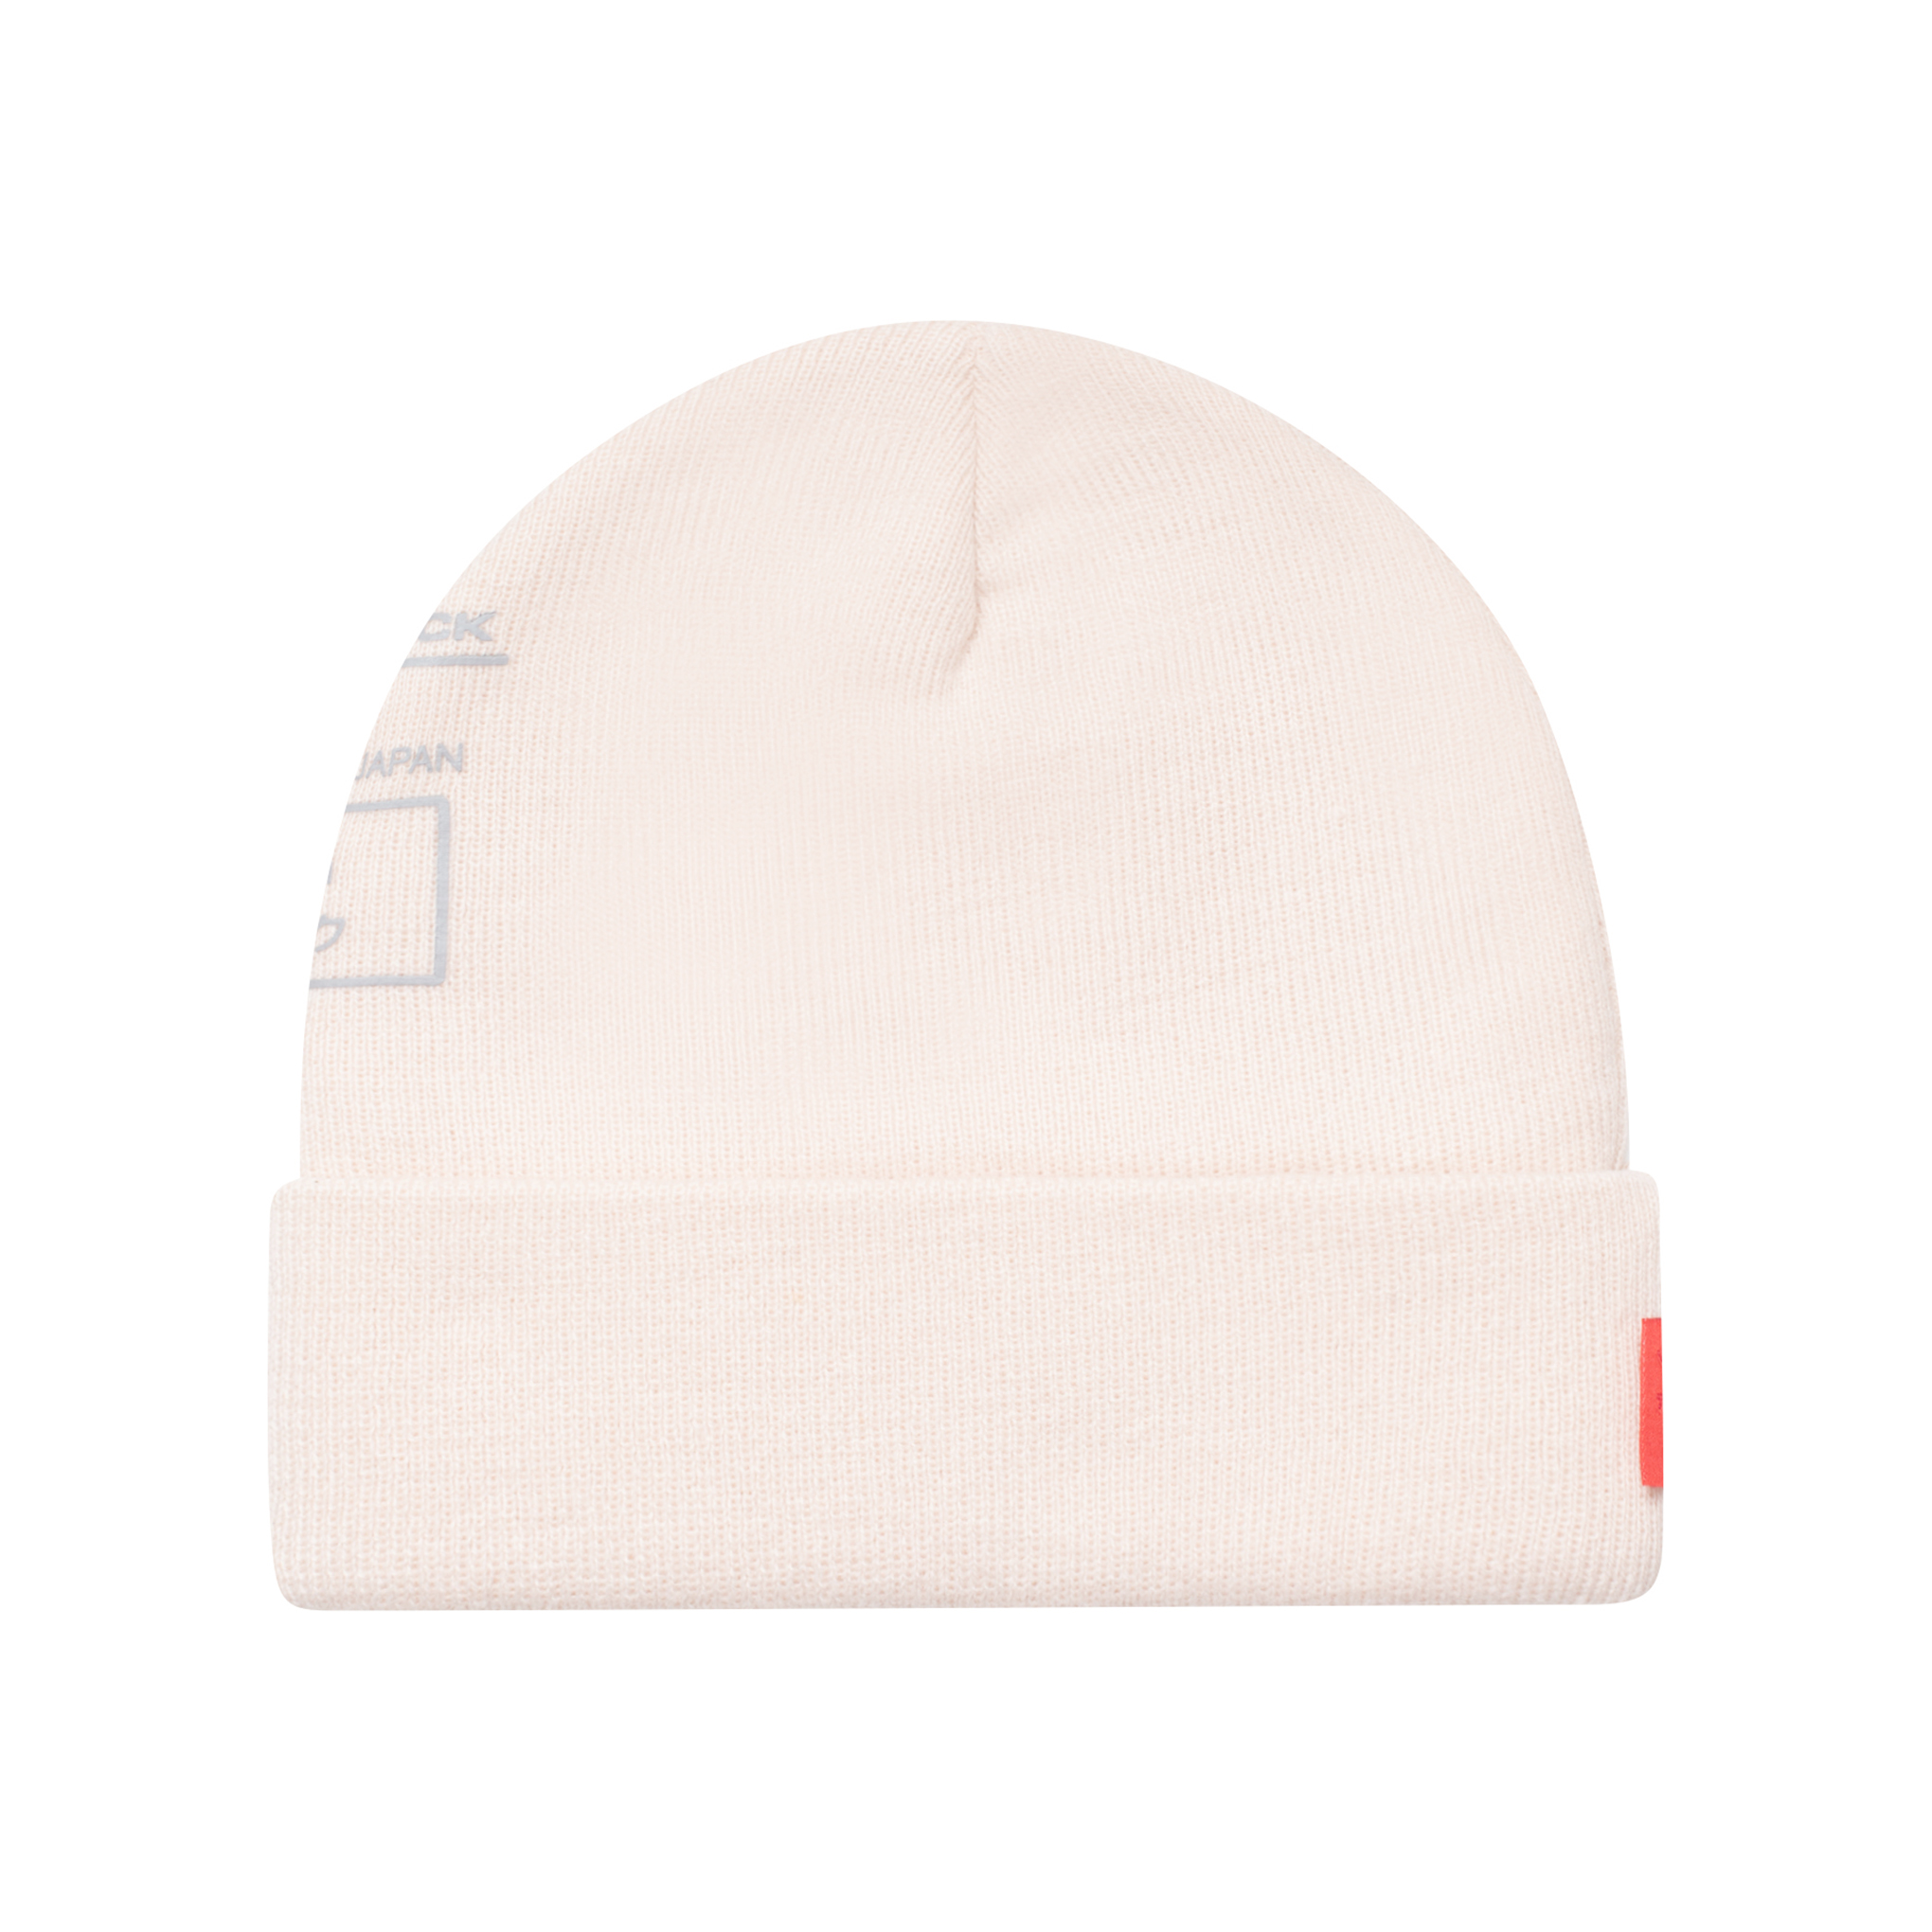 CACTUS JACK SYSTEM II BEANIE NATURAL